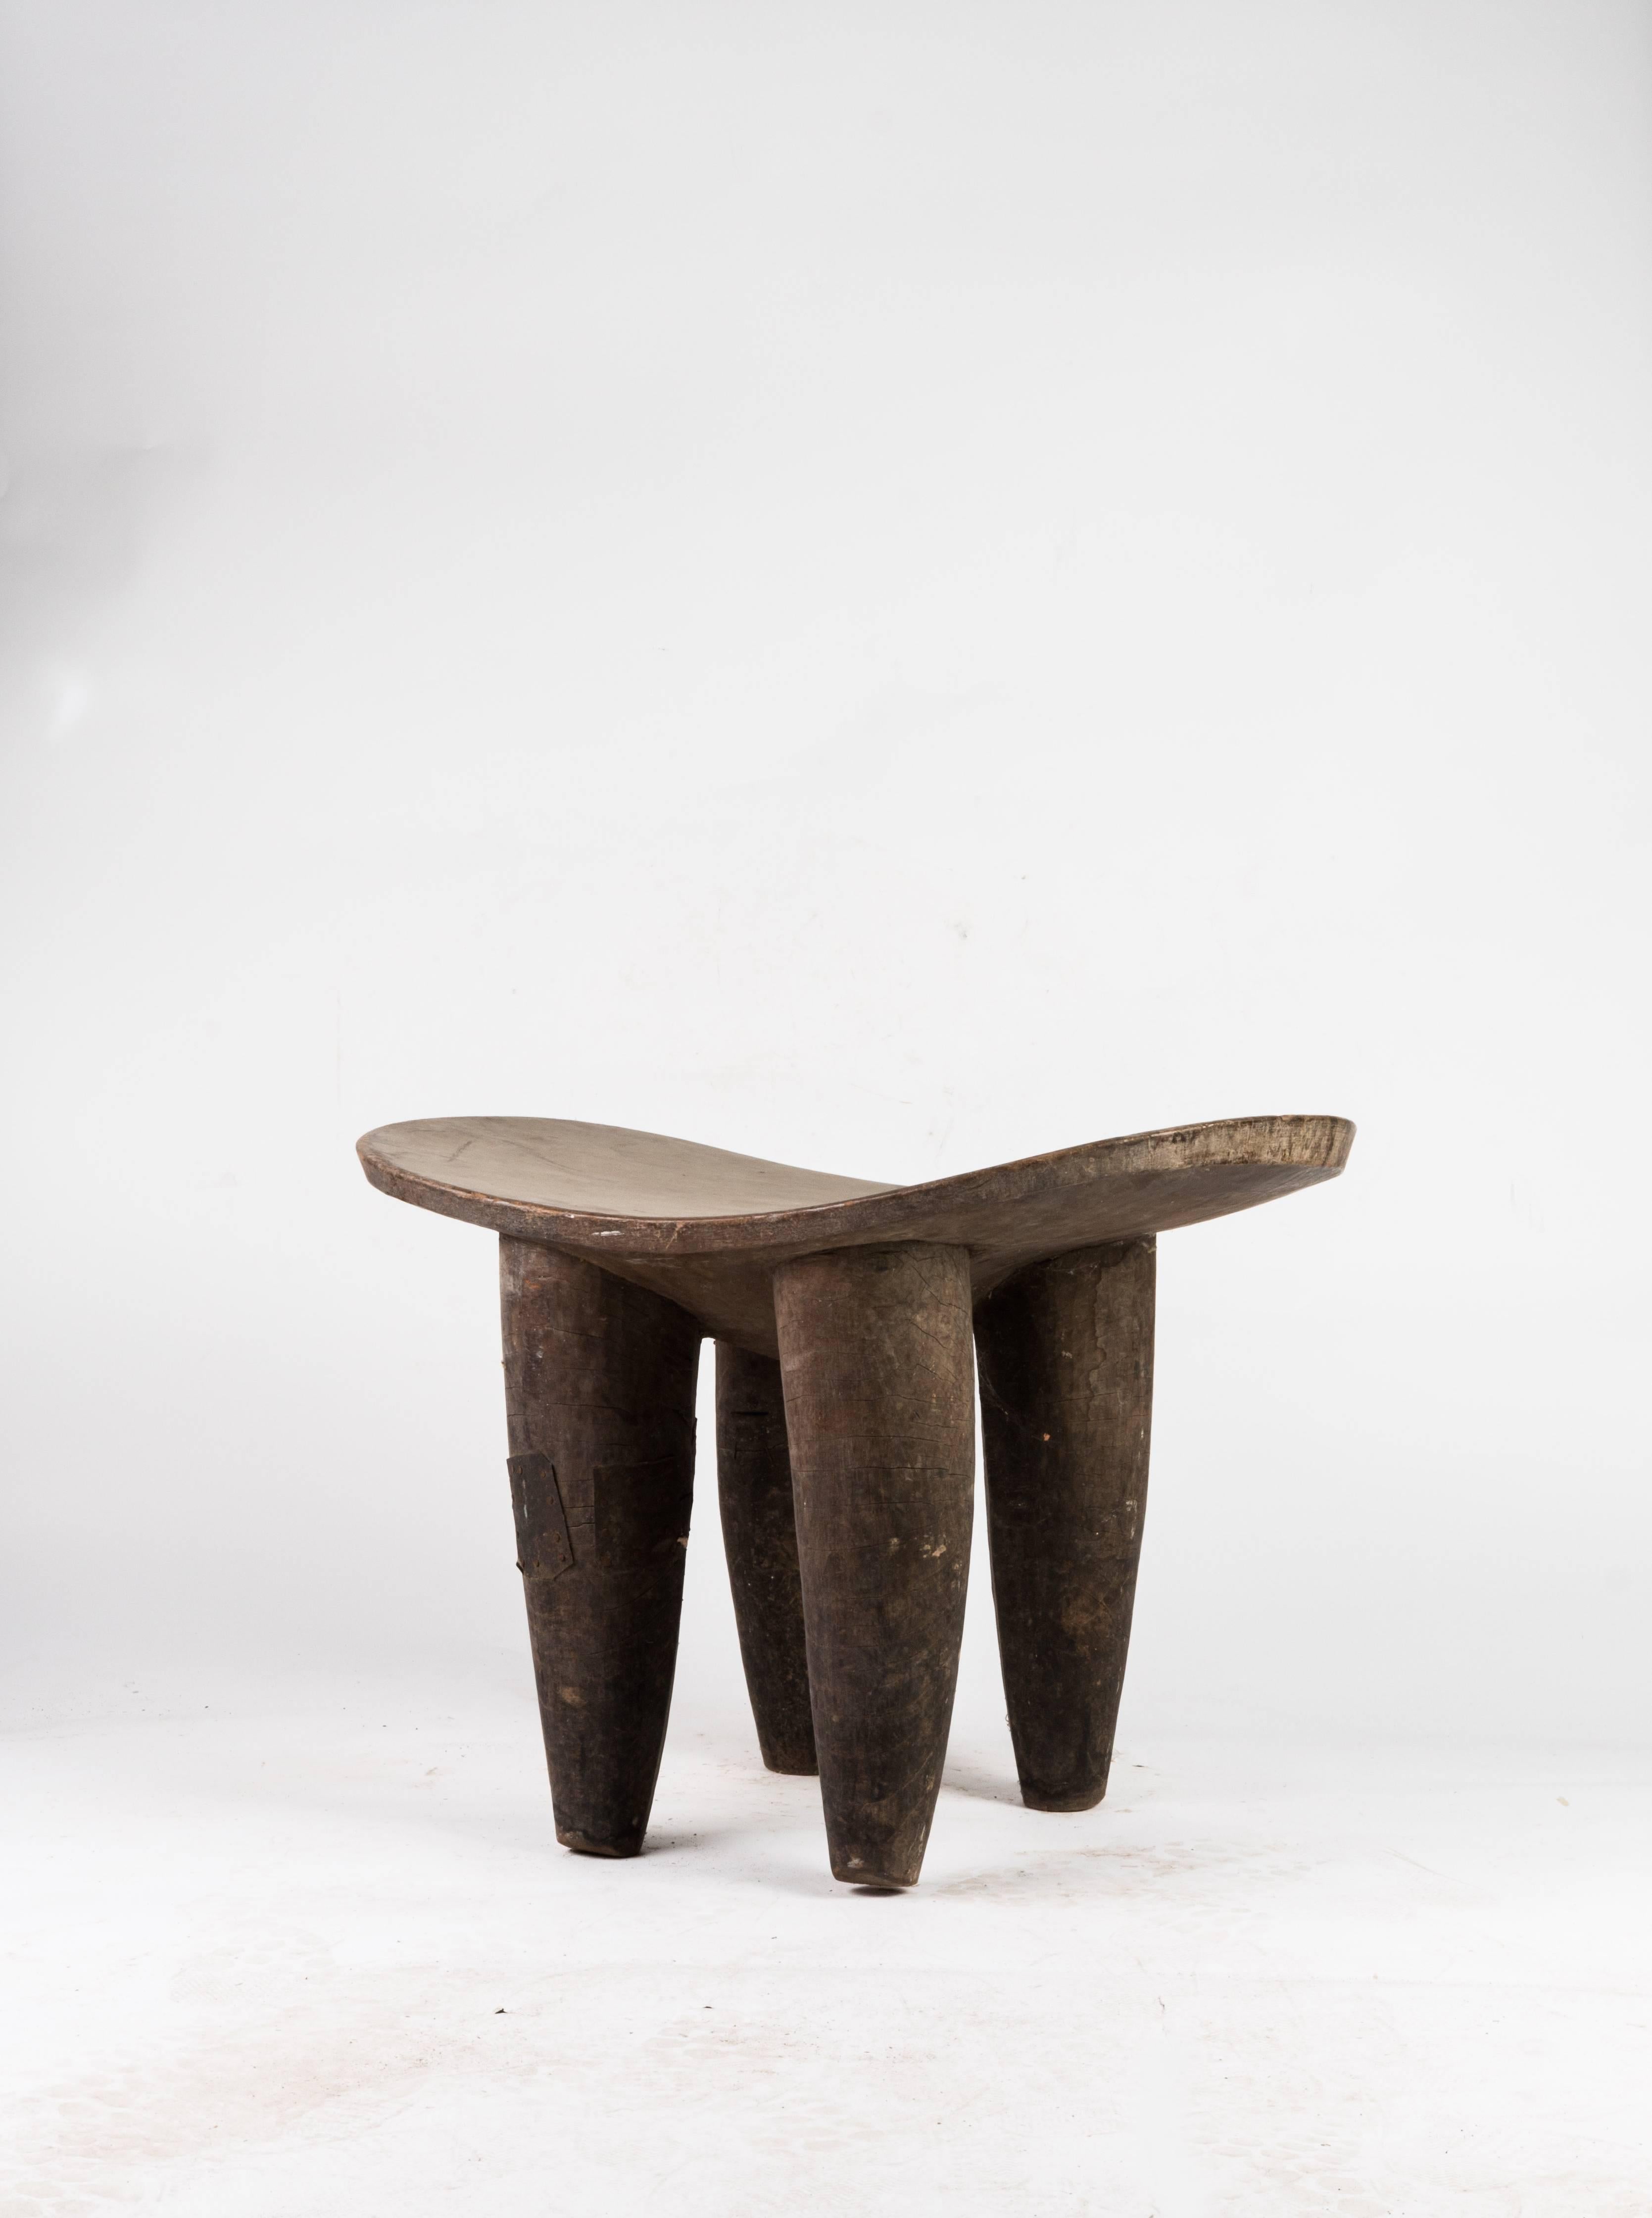 An incredible large sculptural Senufo stool. Handmade by the Senufo tribe, Cote d'Ivoire, Africa. Functional as a stool or table. Wonderful aged wood with natural patina. Ships worldwide.